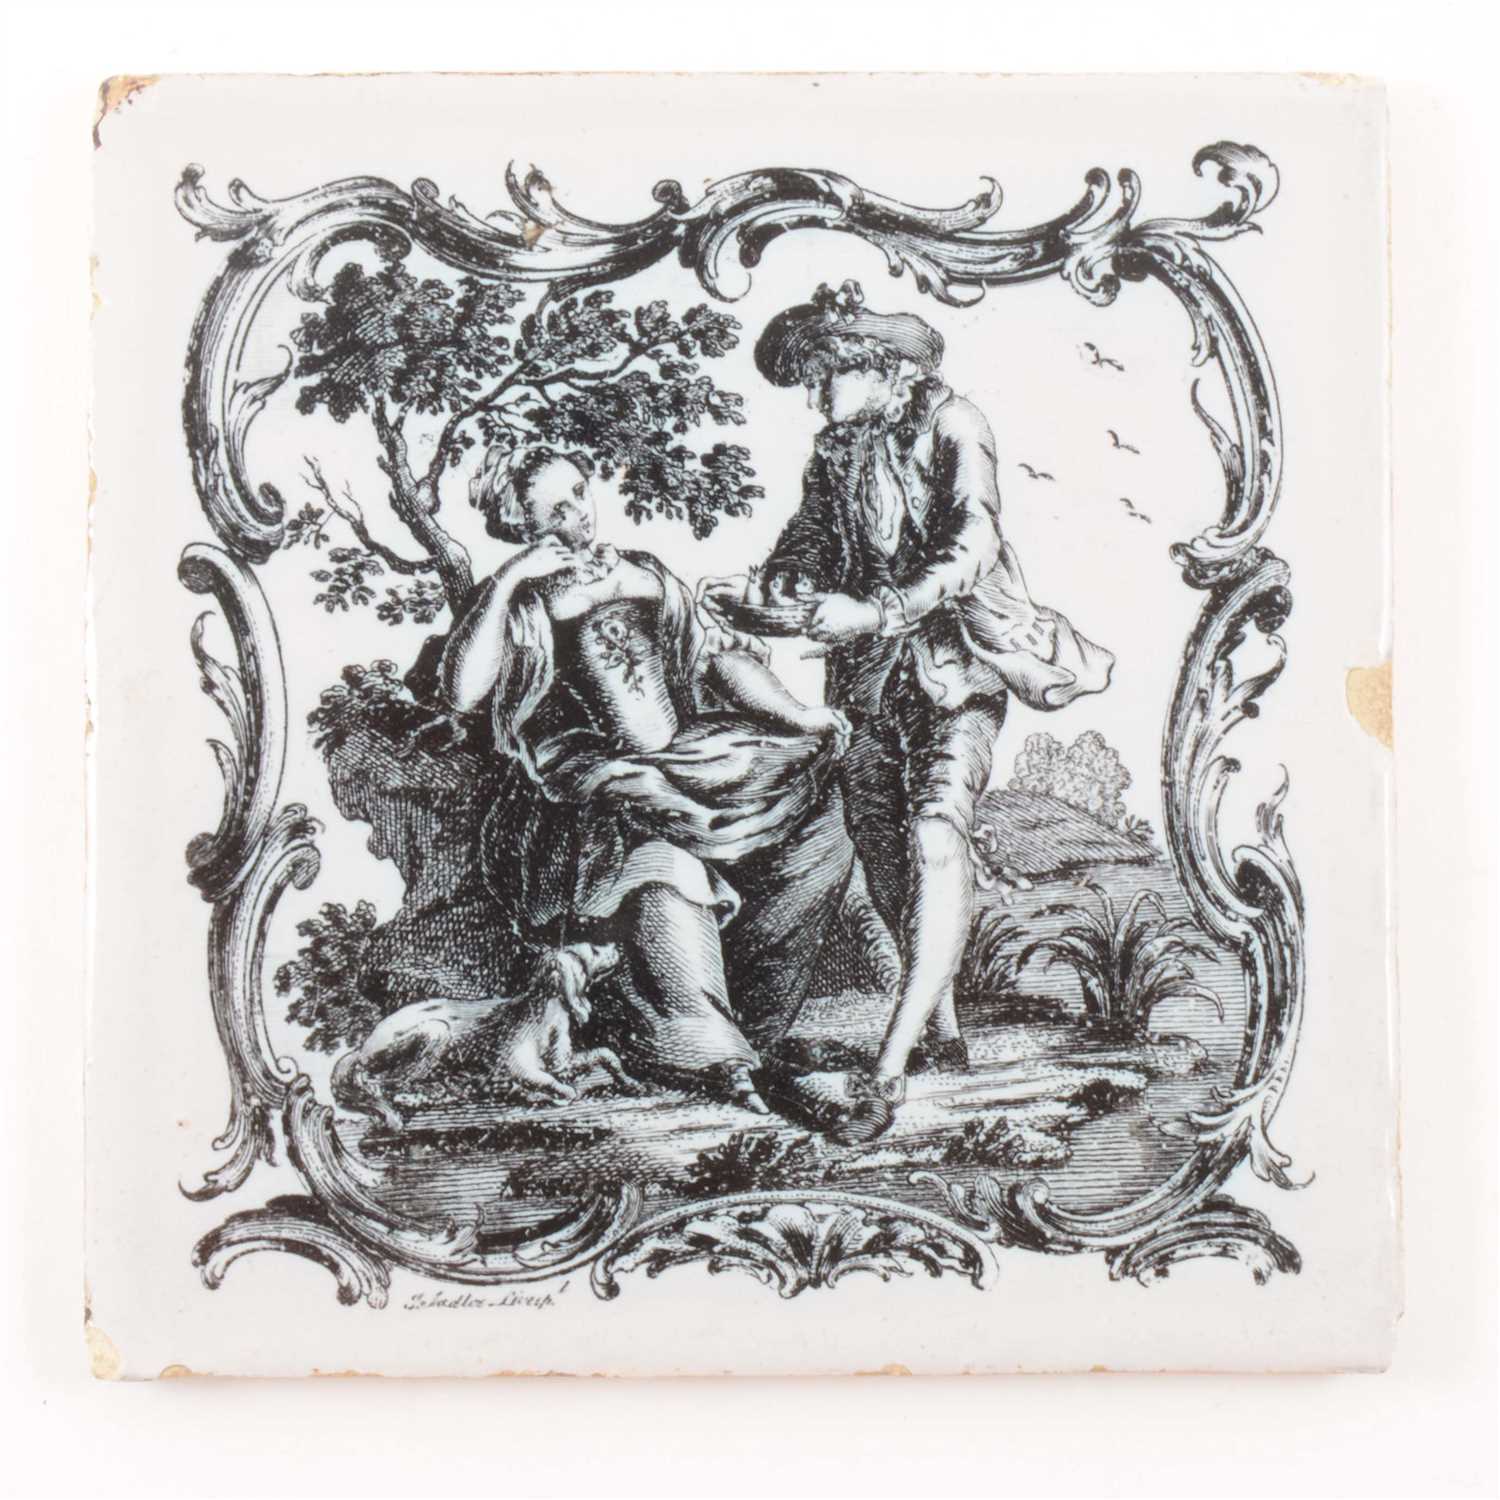 Lot 15 - An English delft tile, by John Sadler of Liverpool, 1760's